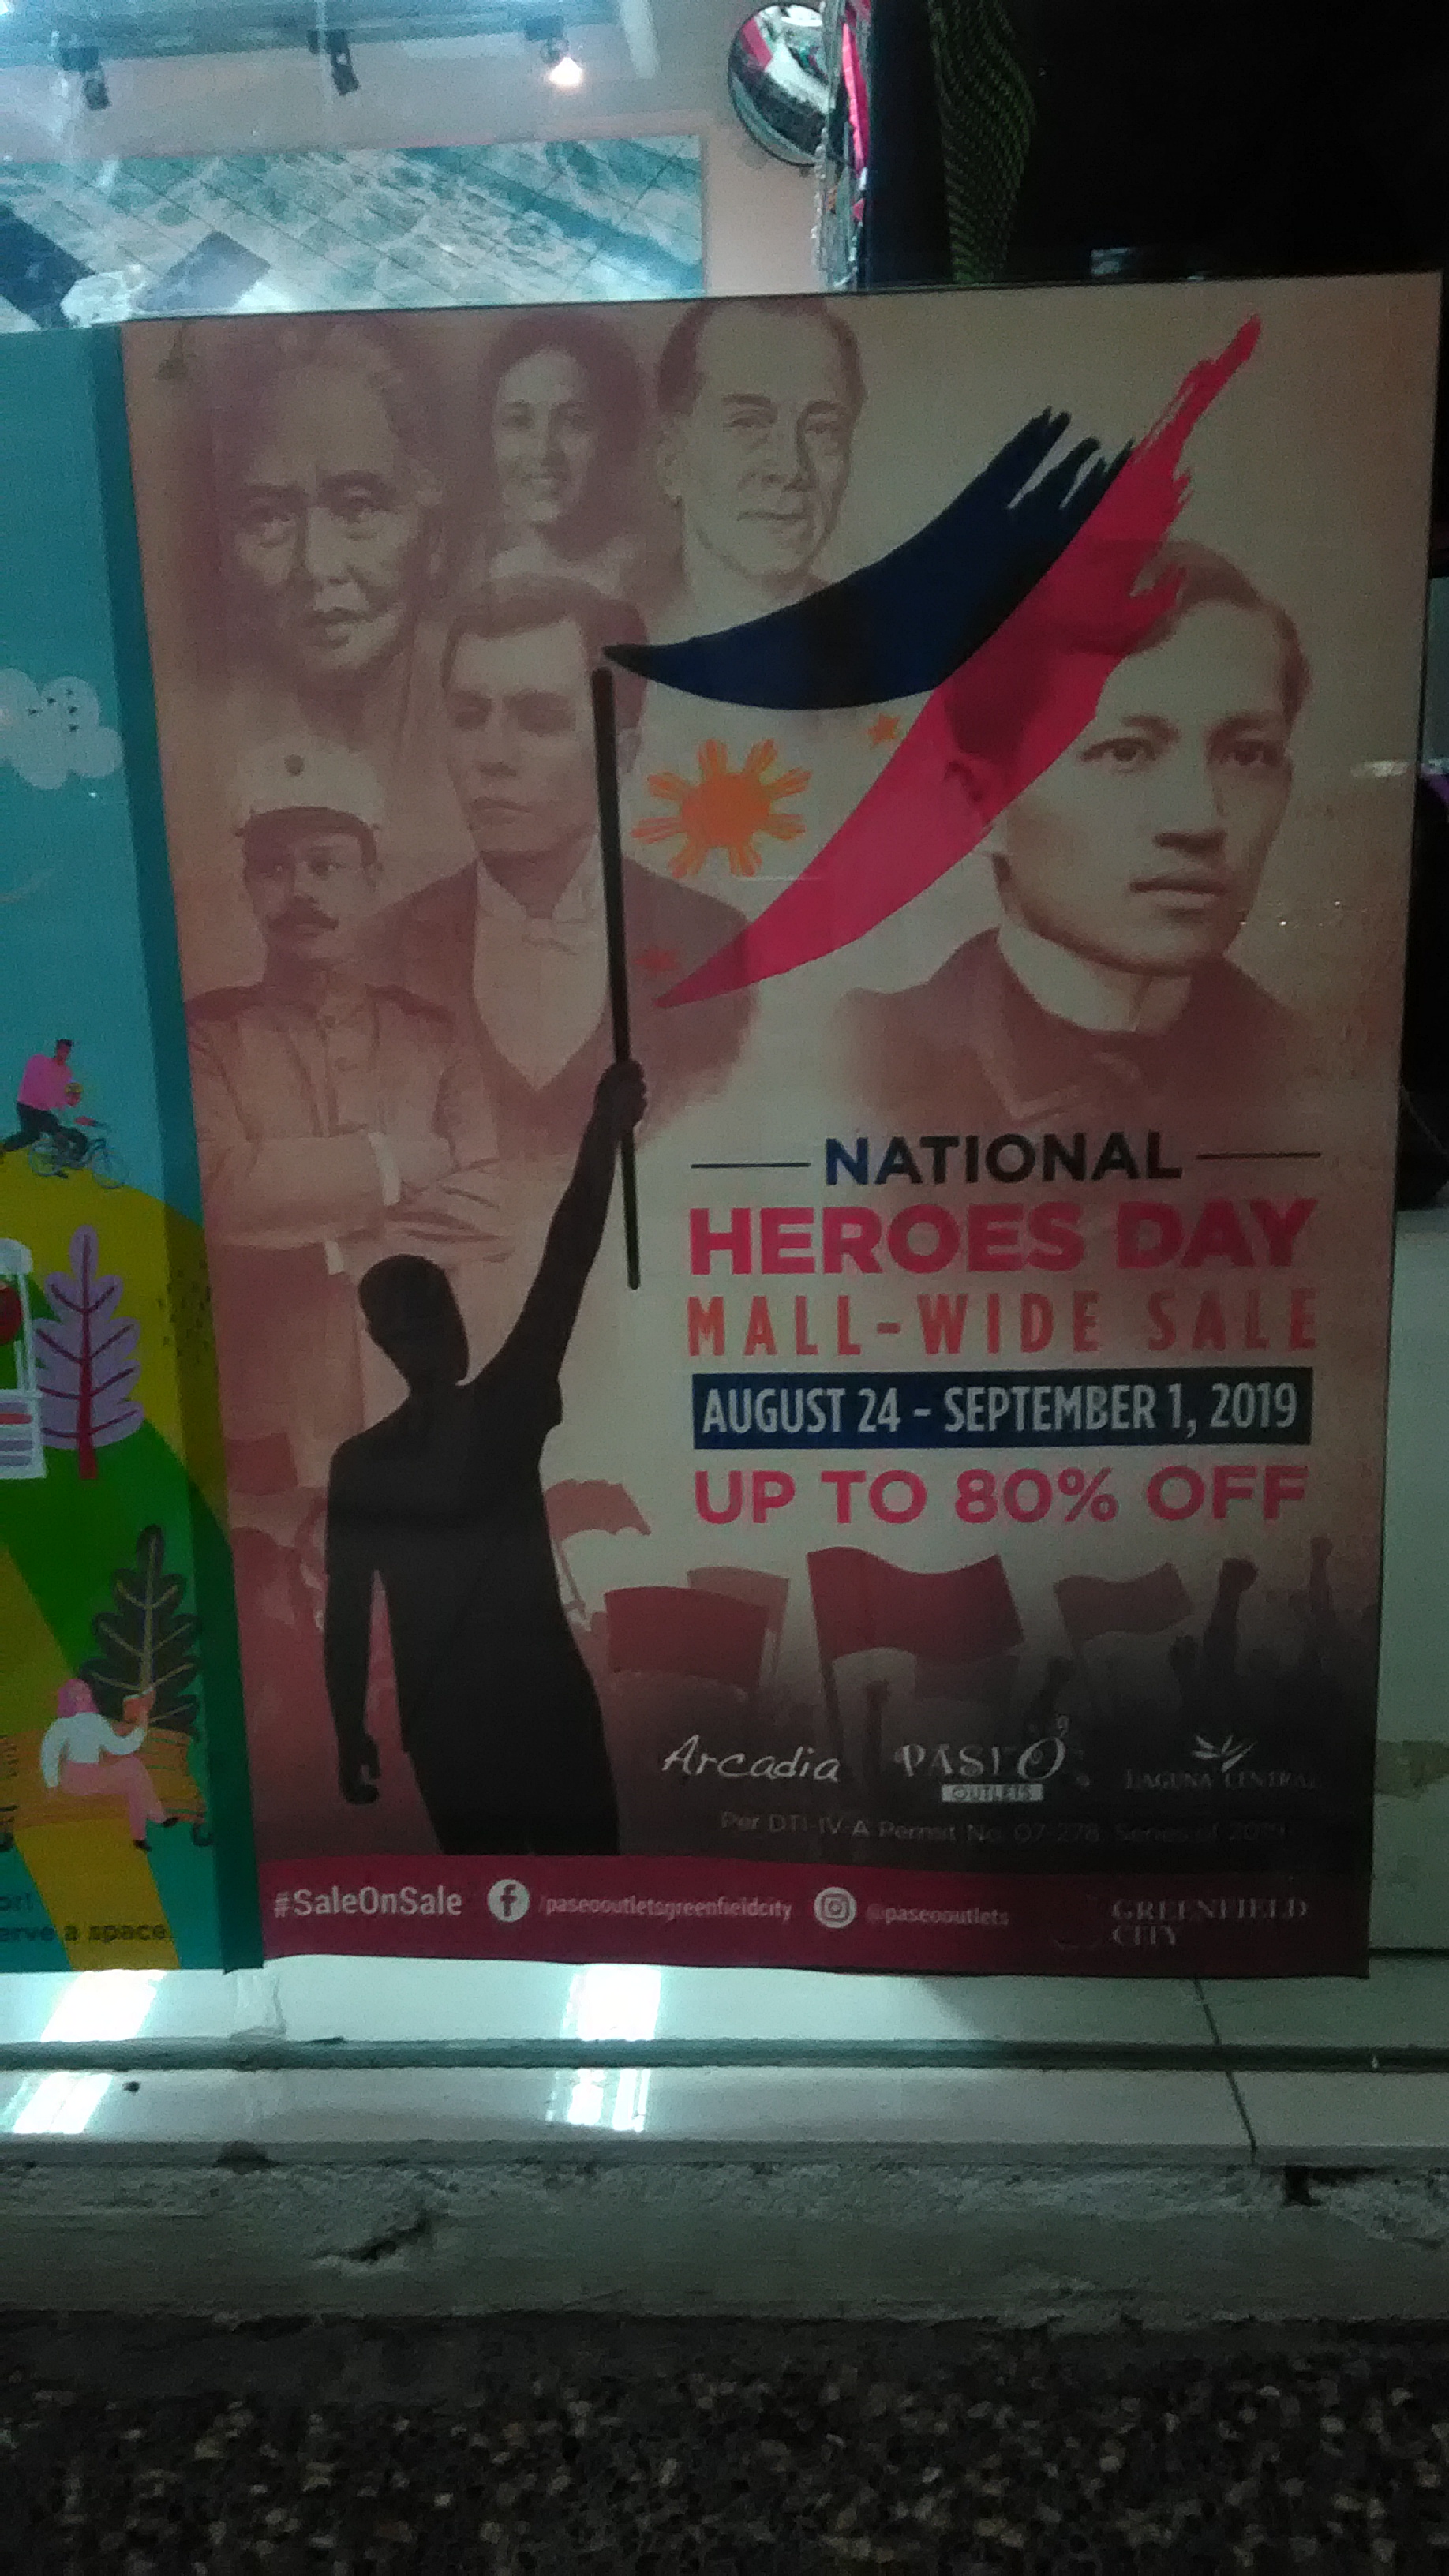 National Heroes’ Day Mall-wide Sale at Paseo Sta. Rosa, Laguna